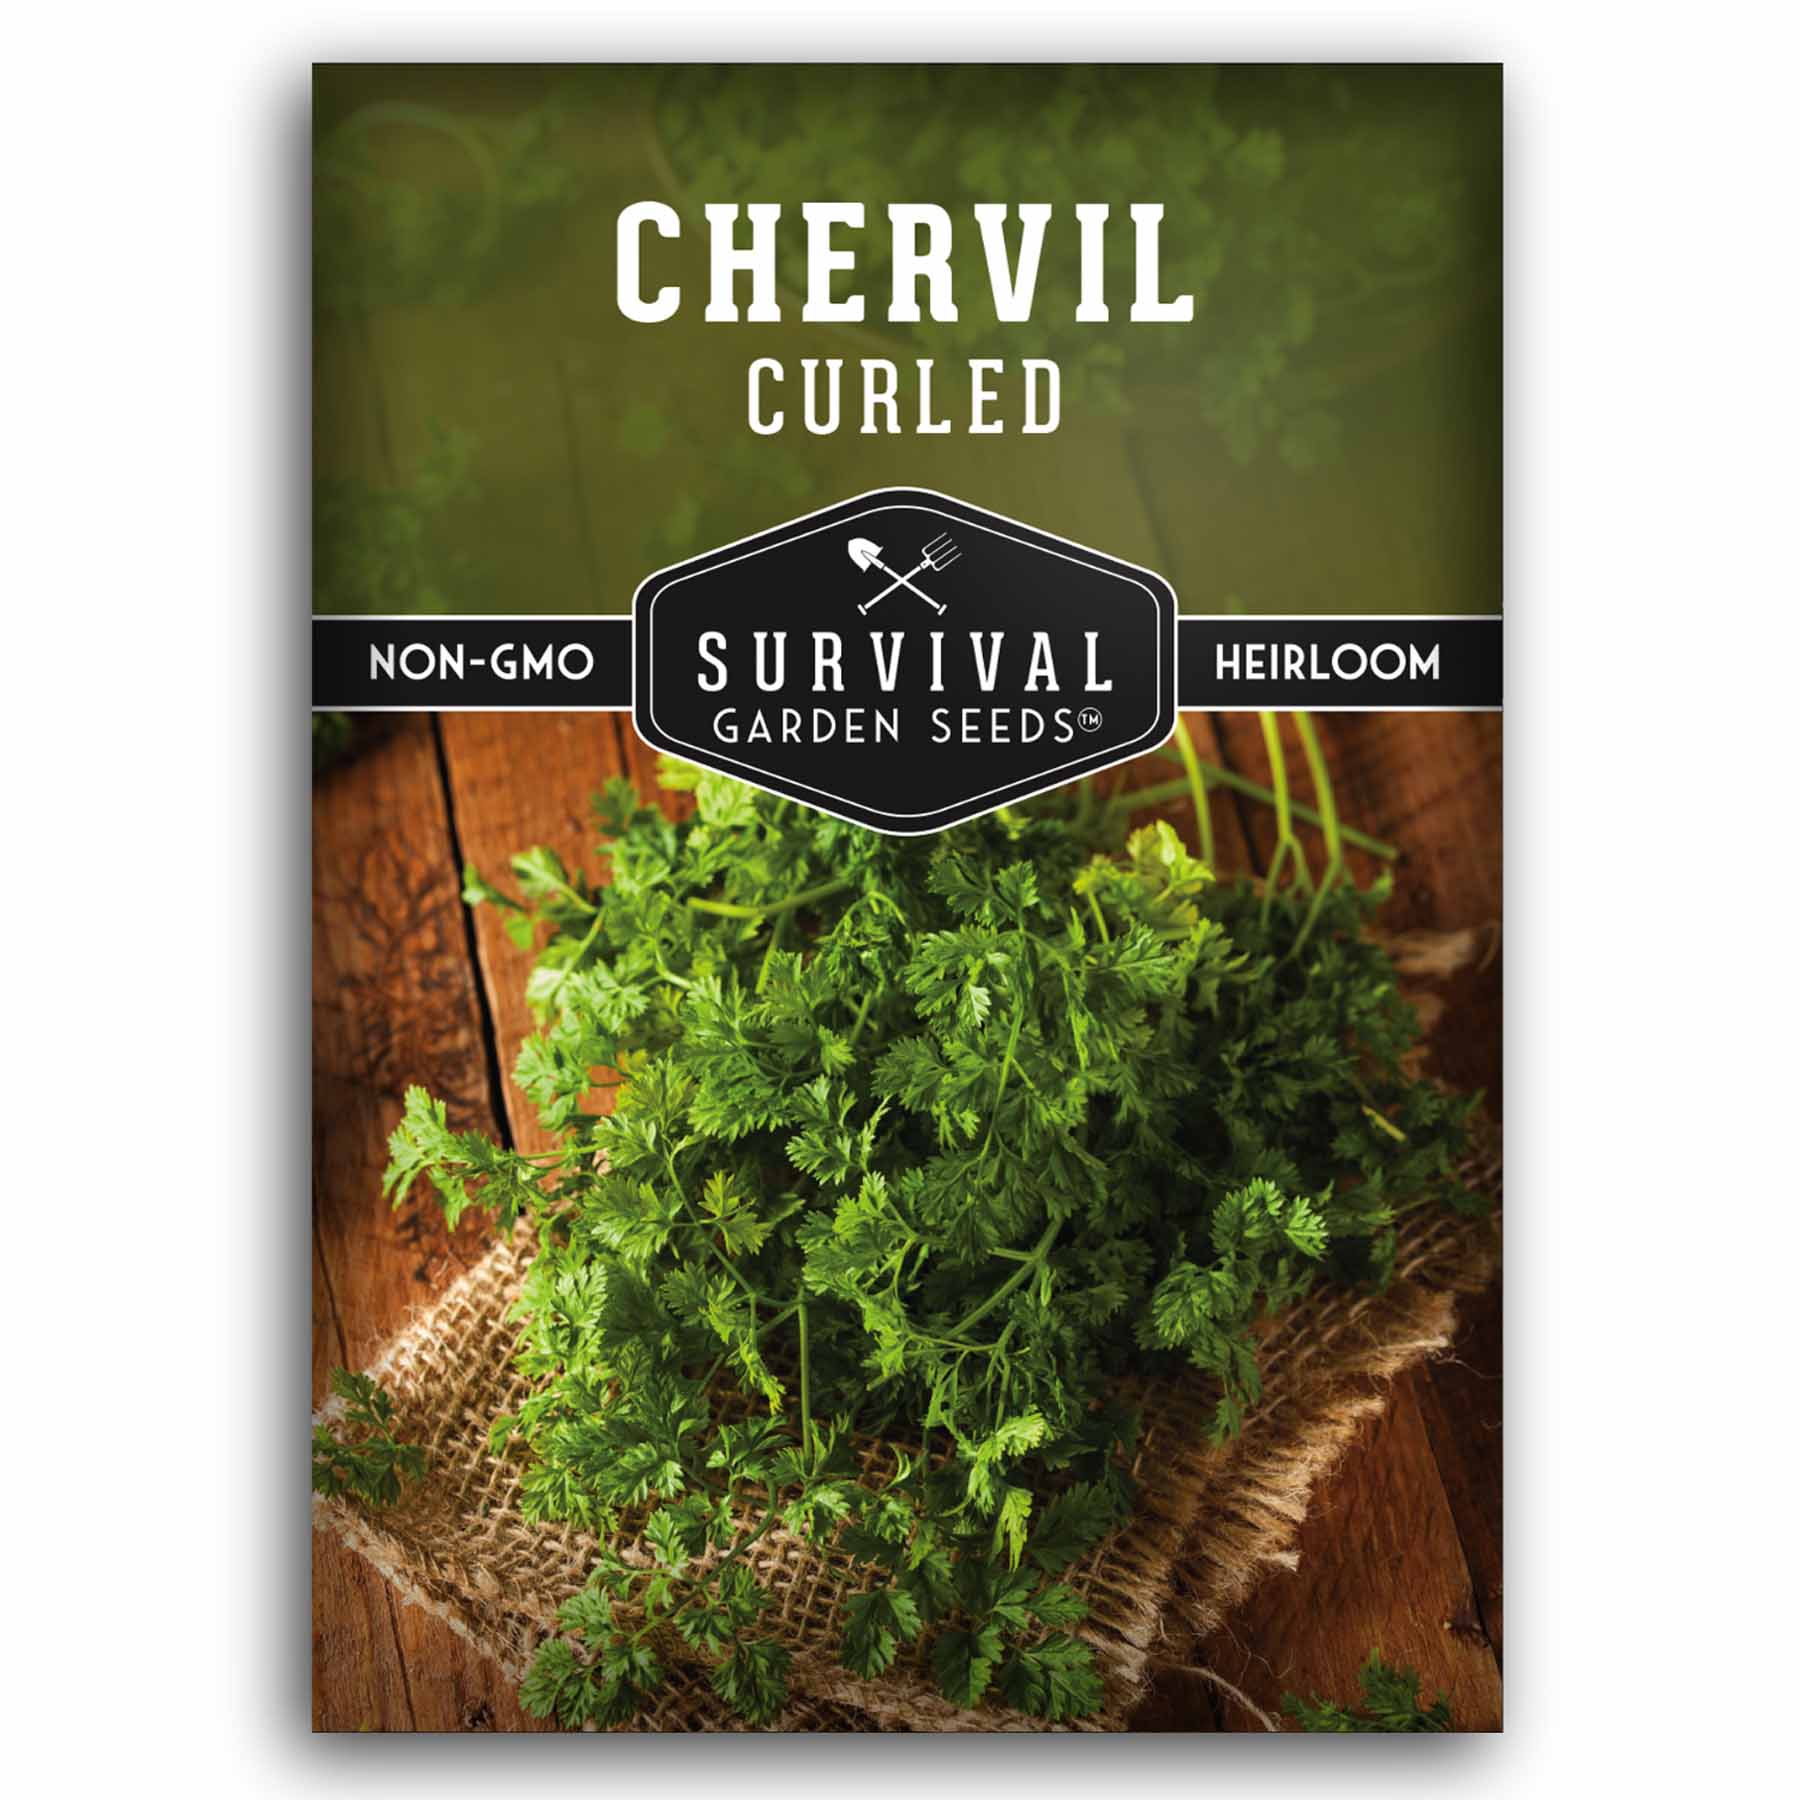 1 packet of Curled Chervil seeds